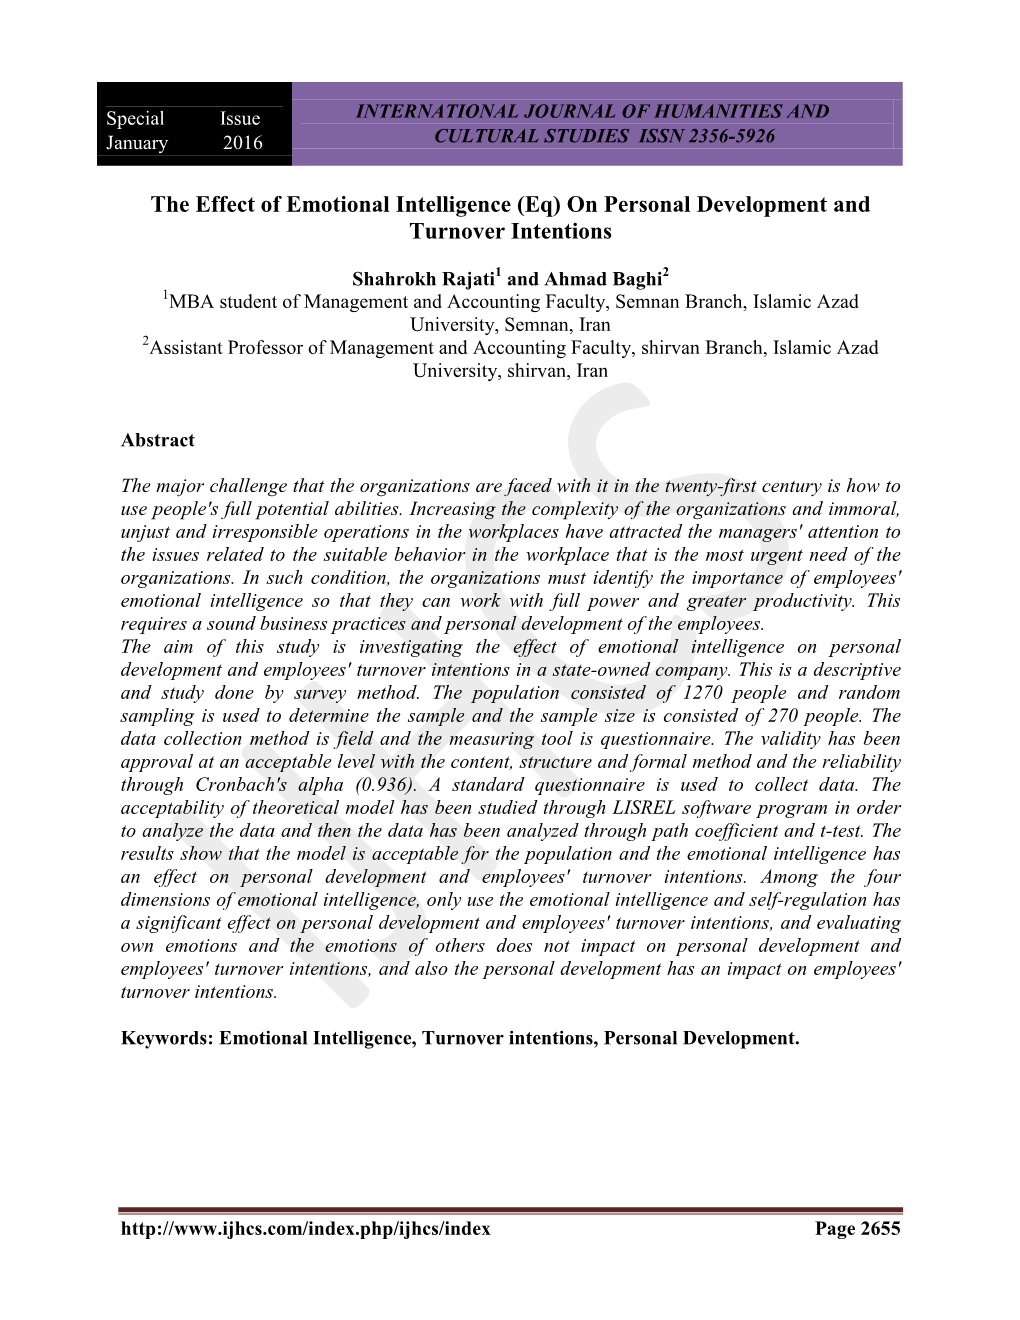 The Effect of Emotional Intelligence (Eq) on Personal Development and Turnover Intentions